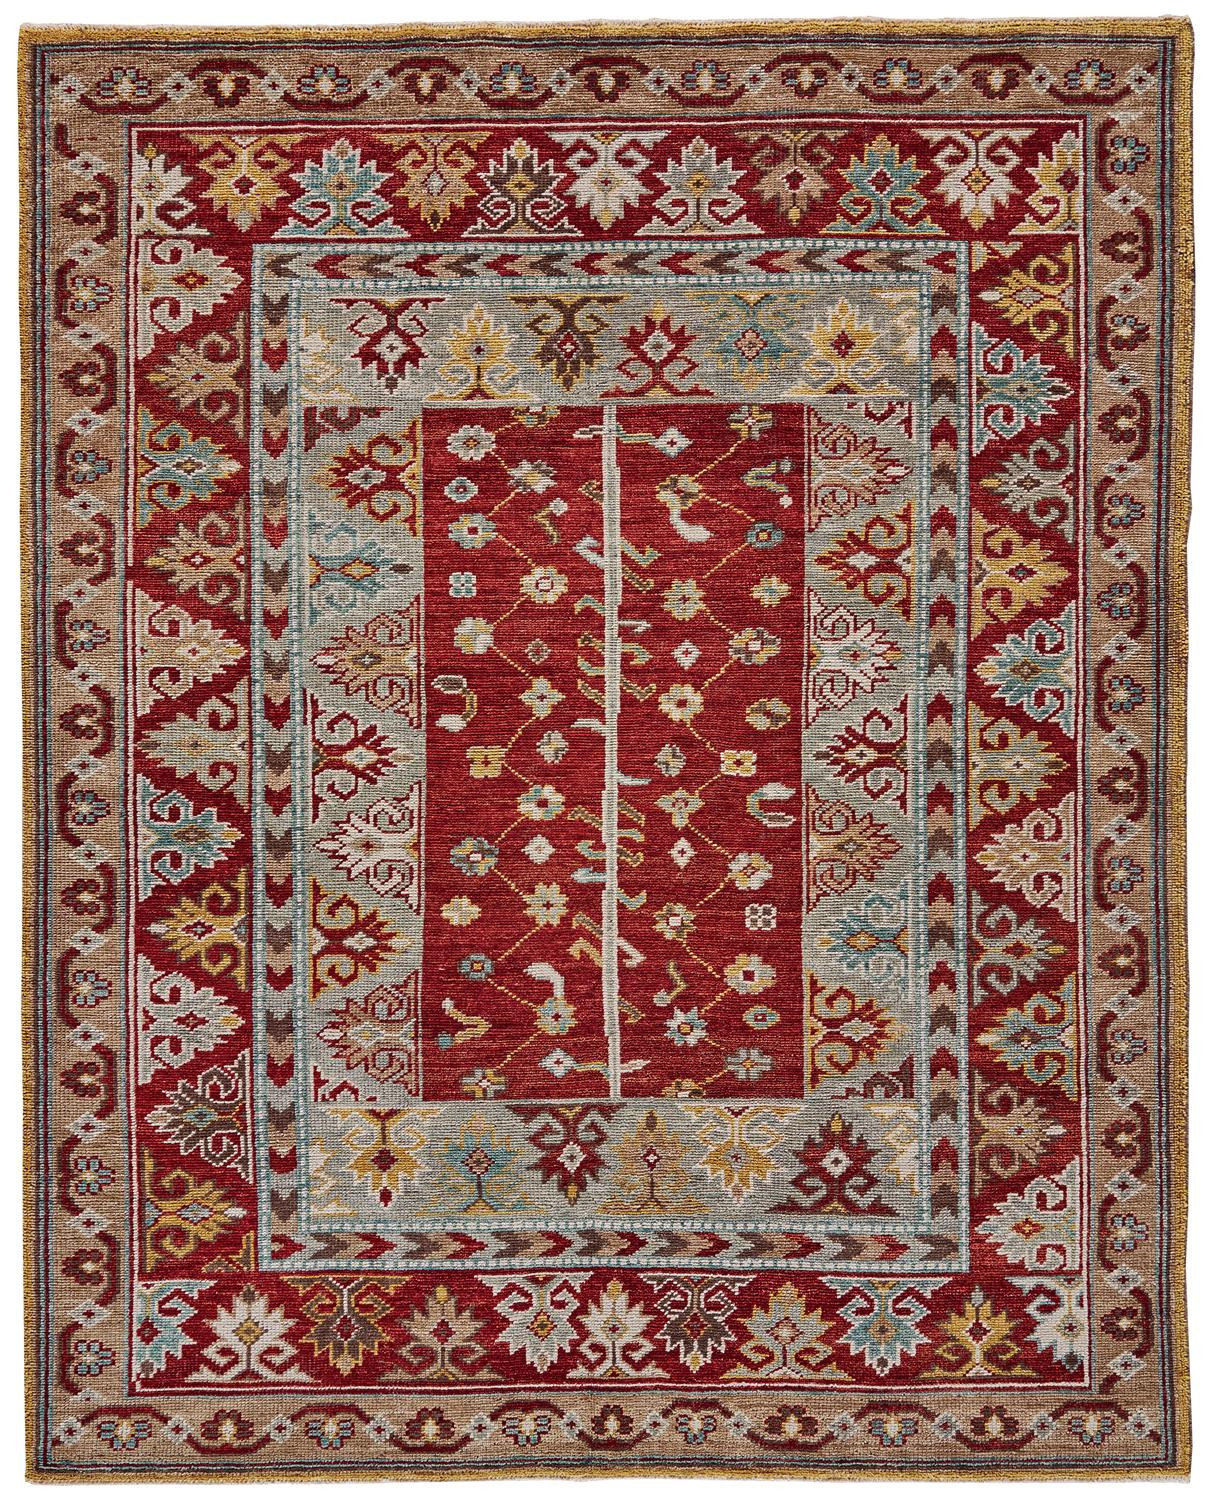 8' X 10' Red Blue And Brown Wool Floral Hand Knotted Distressed Stain Resistant Area Rug With Fringe-511606-1